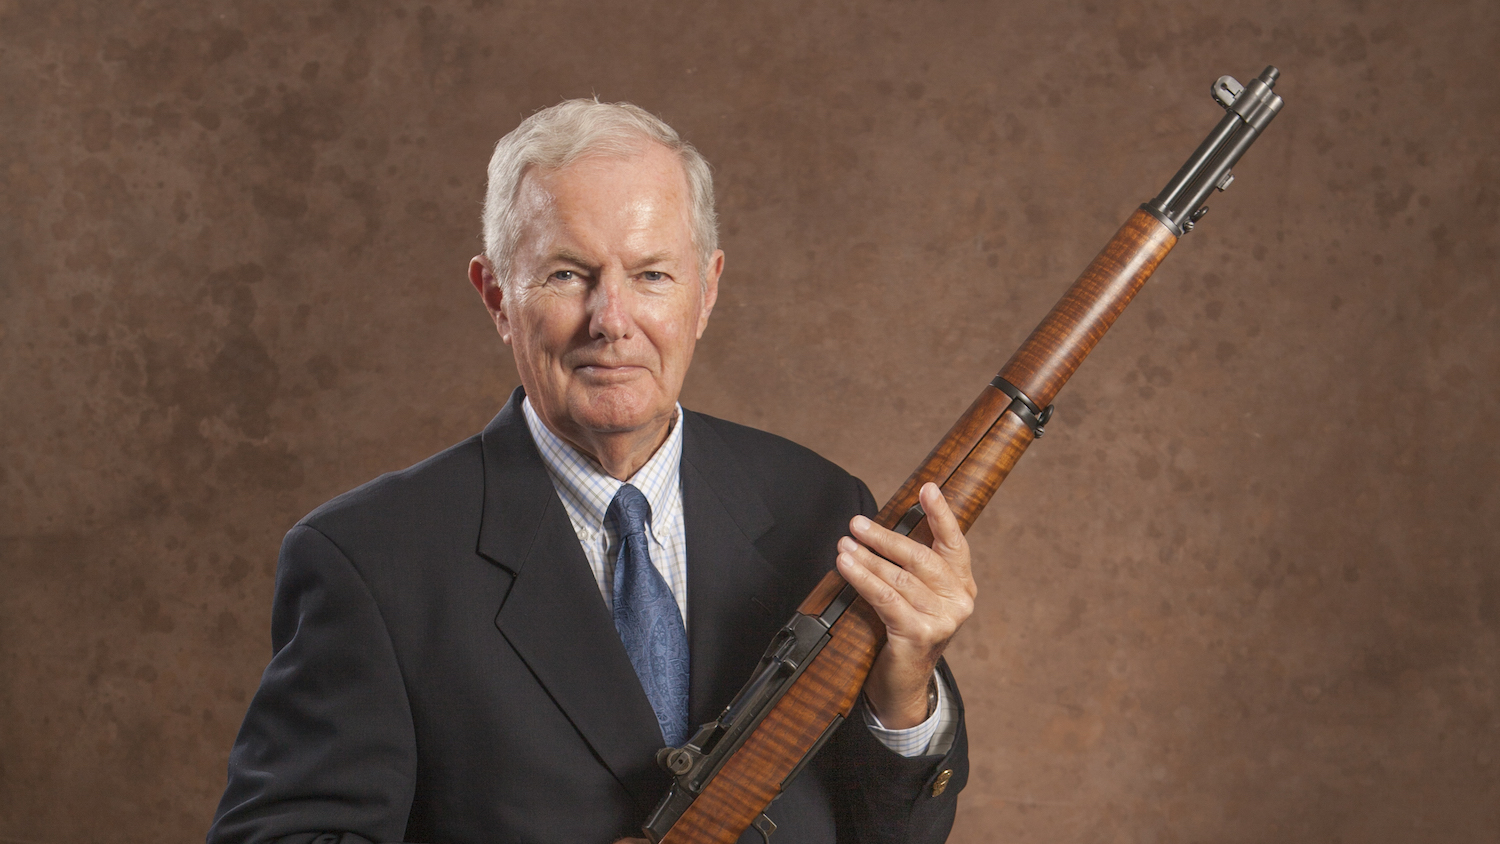 NRA President Allan Cors reflects on the M1 Garand